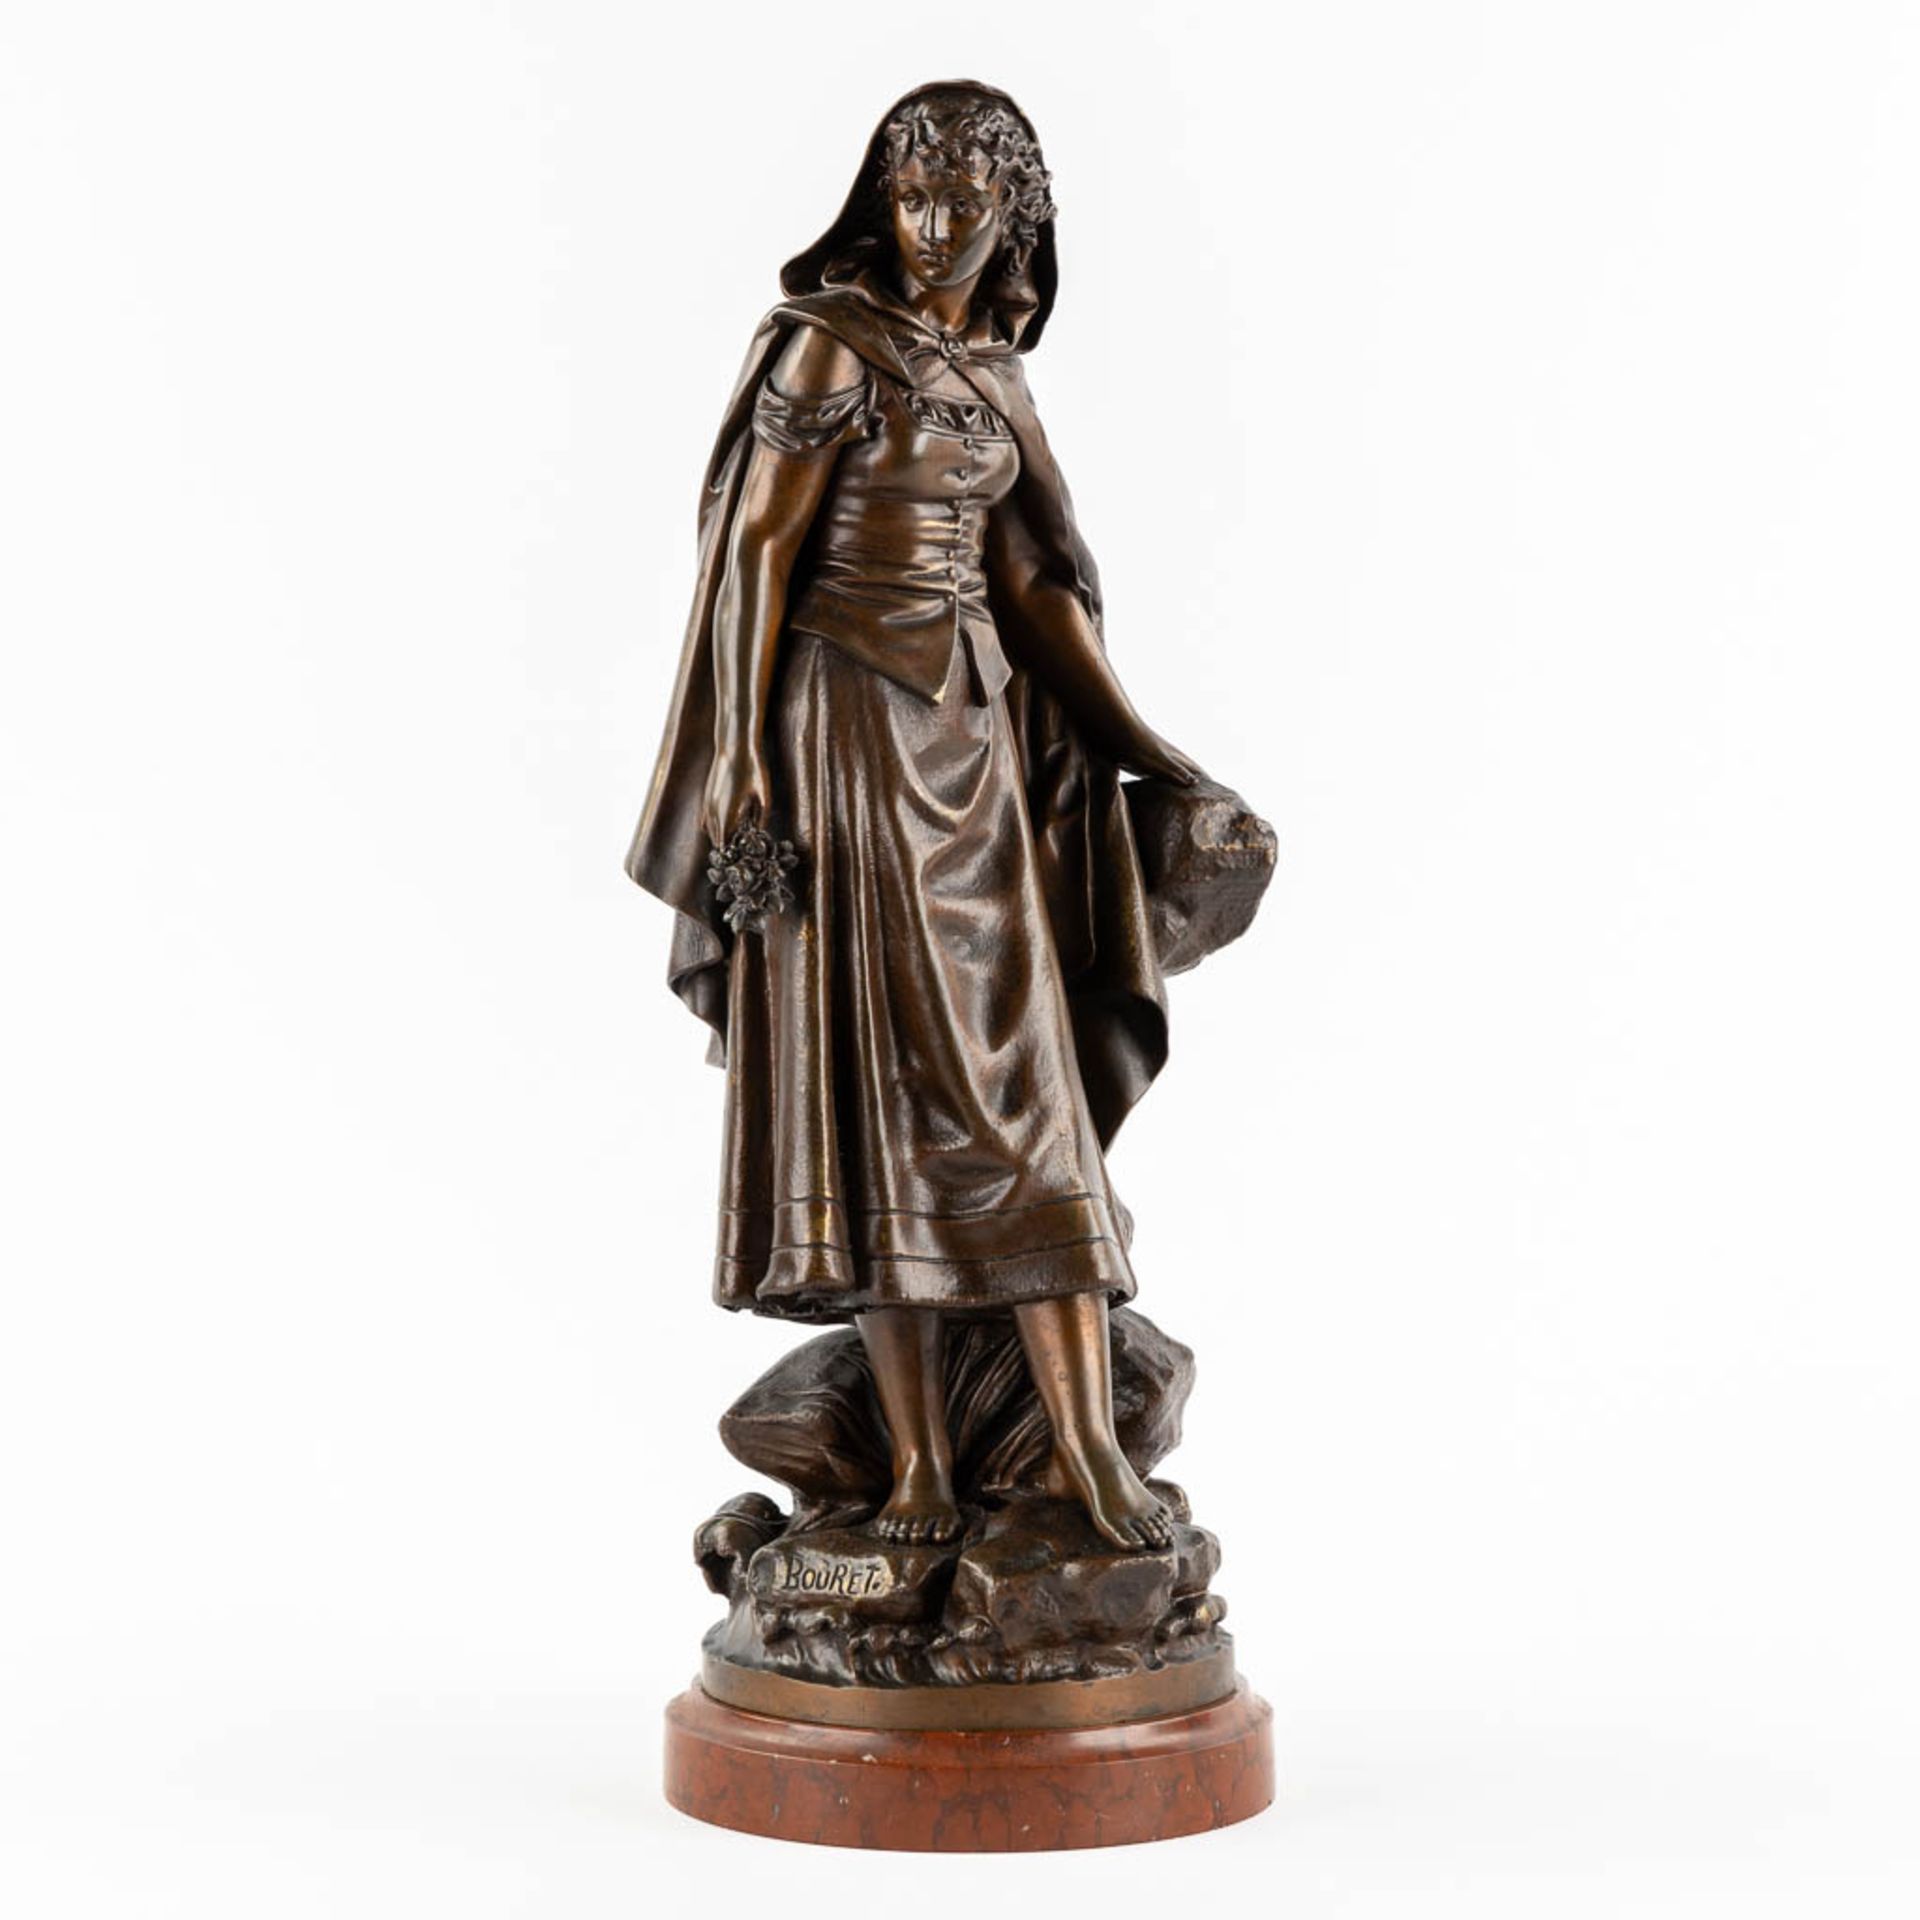 Eutrope BOURET (1833-1906) 'Lady with flowers' patinated bronze on a marble base. (L:19 x W:17 x H:4